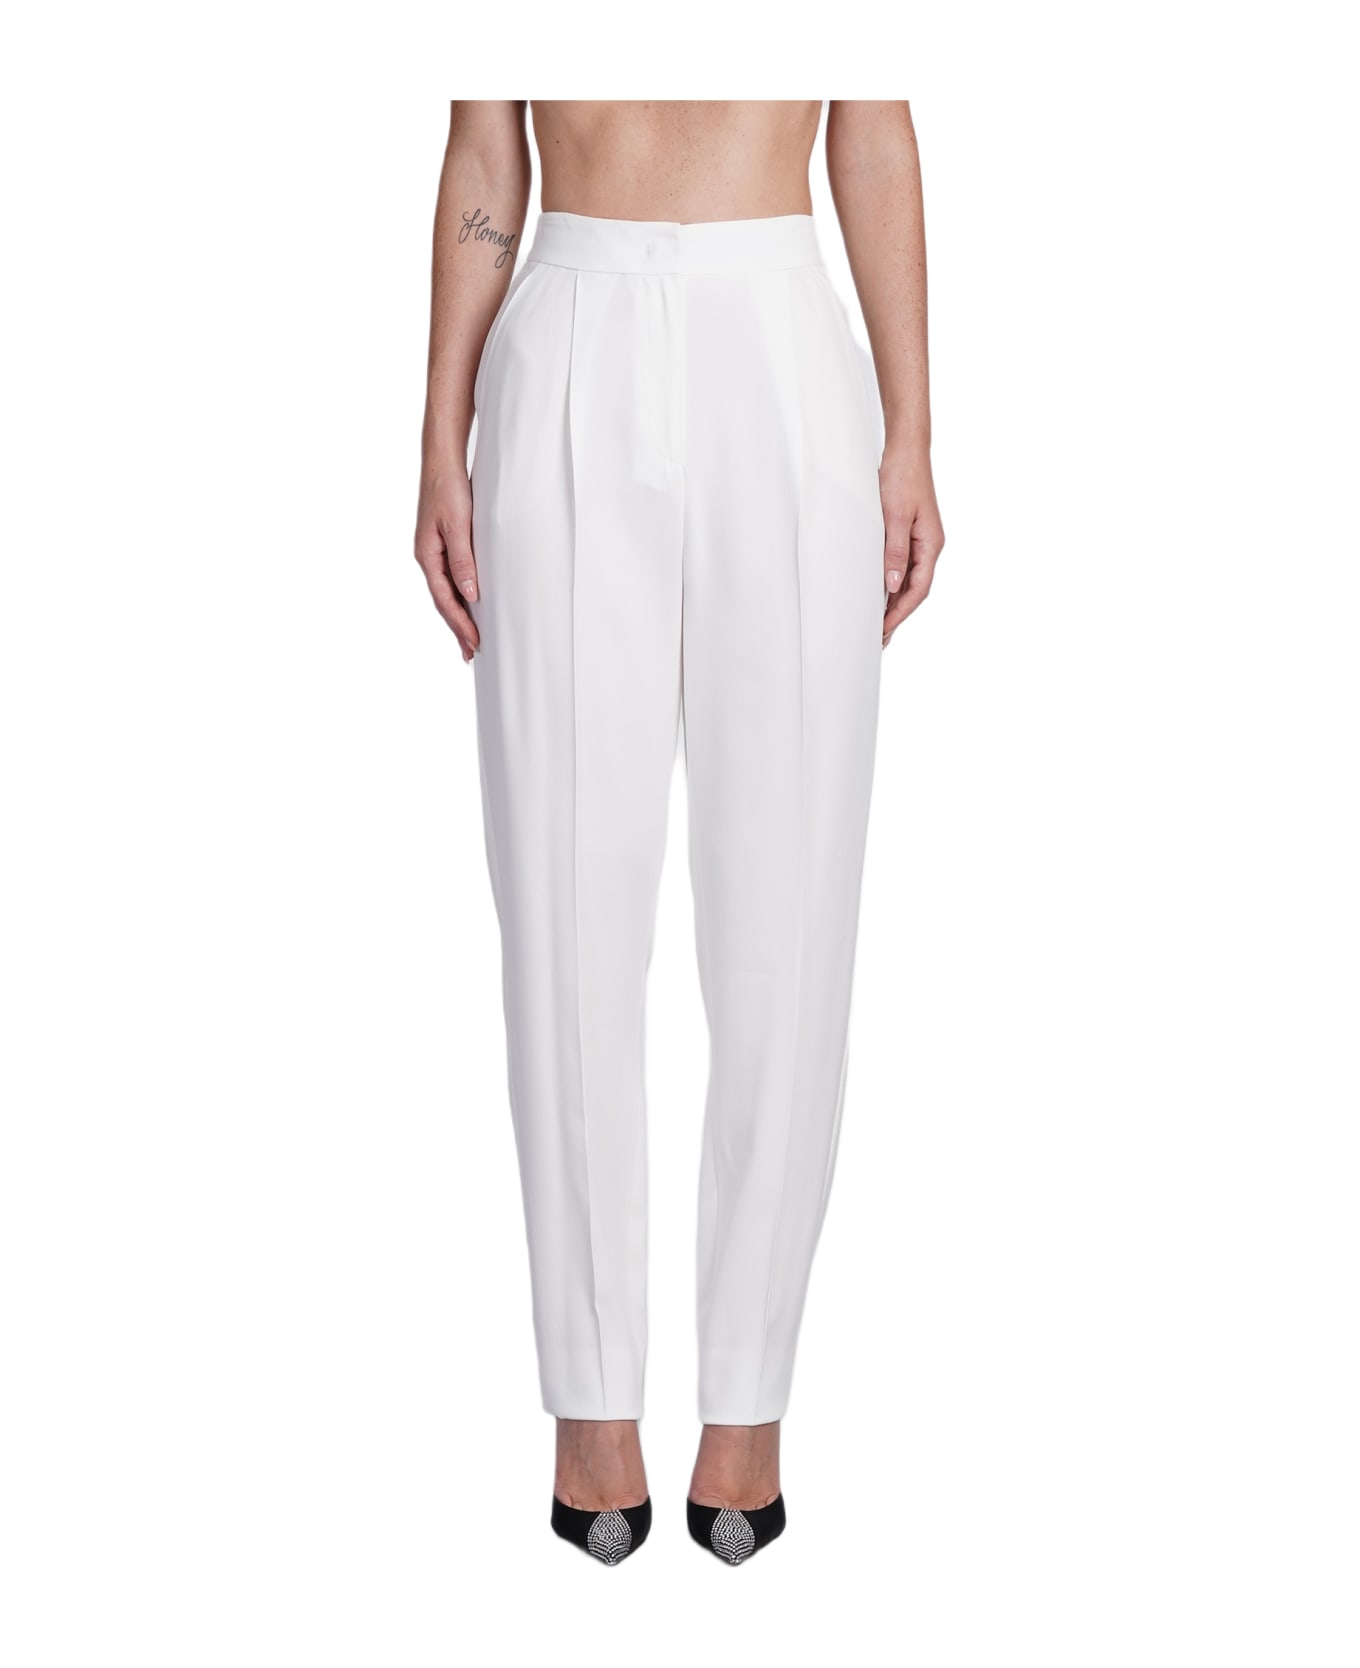 Emporio Armani Darted High-waist Trousers - white ボトムス